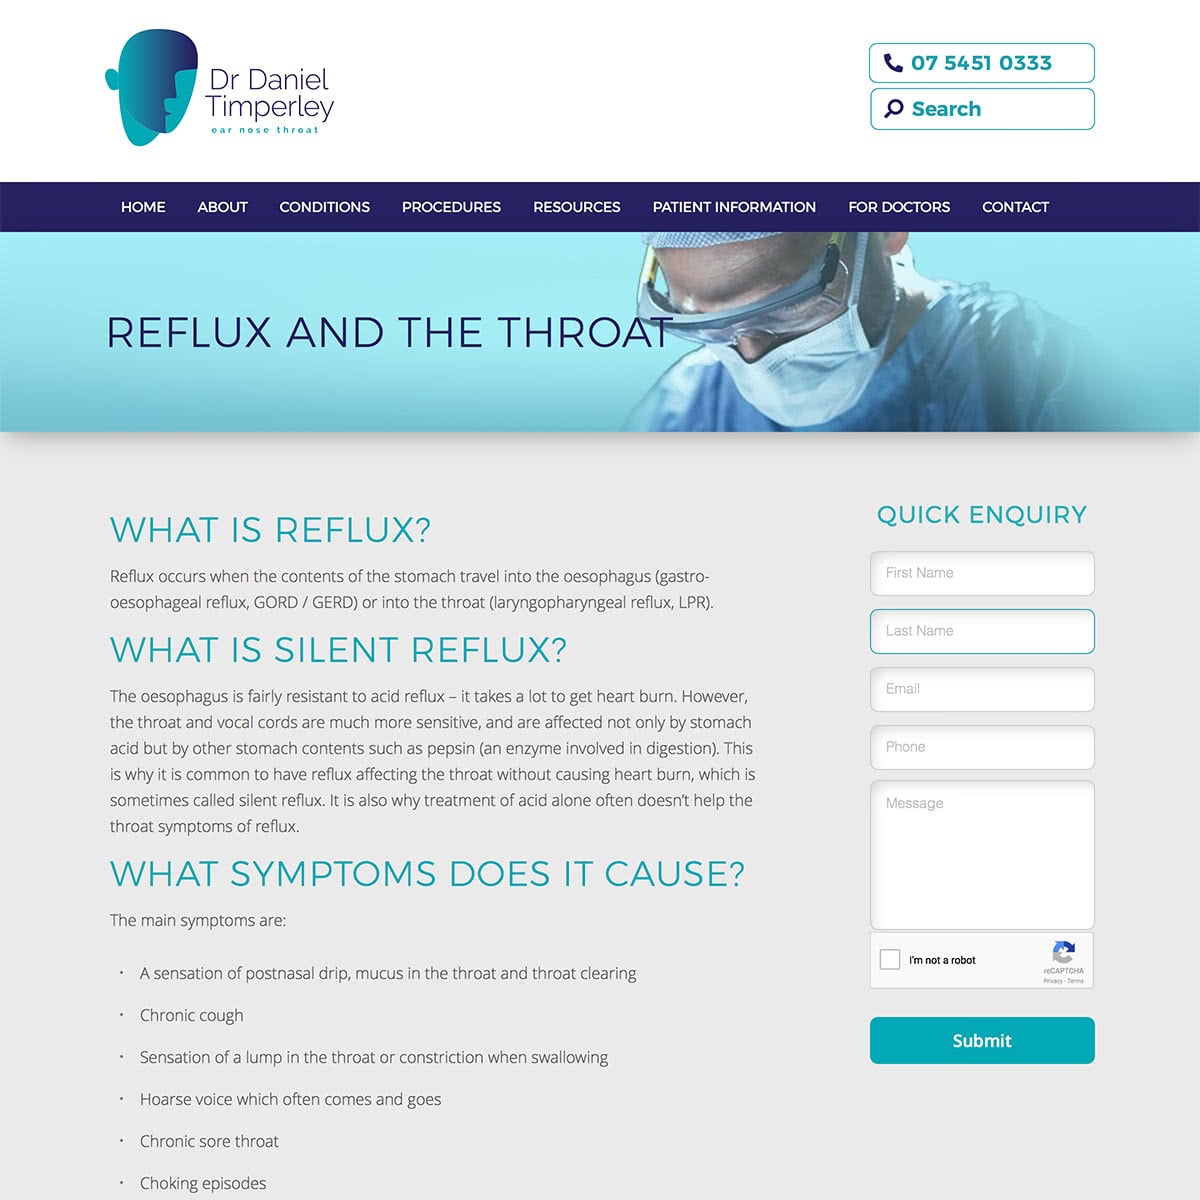 Dr Daniel Timperley - Reflux and the Throat